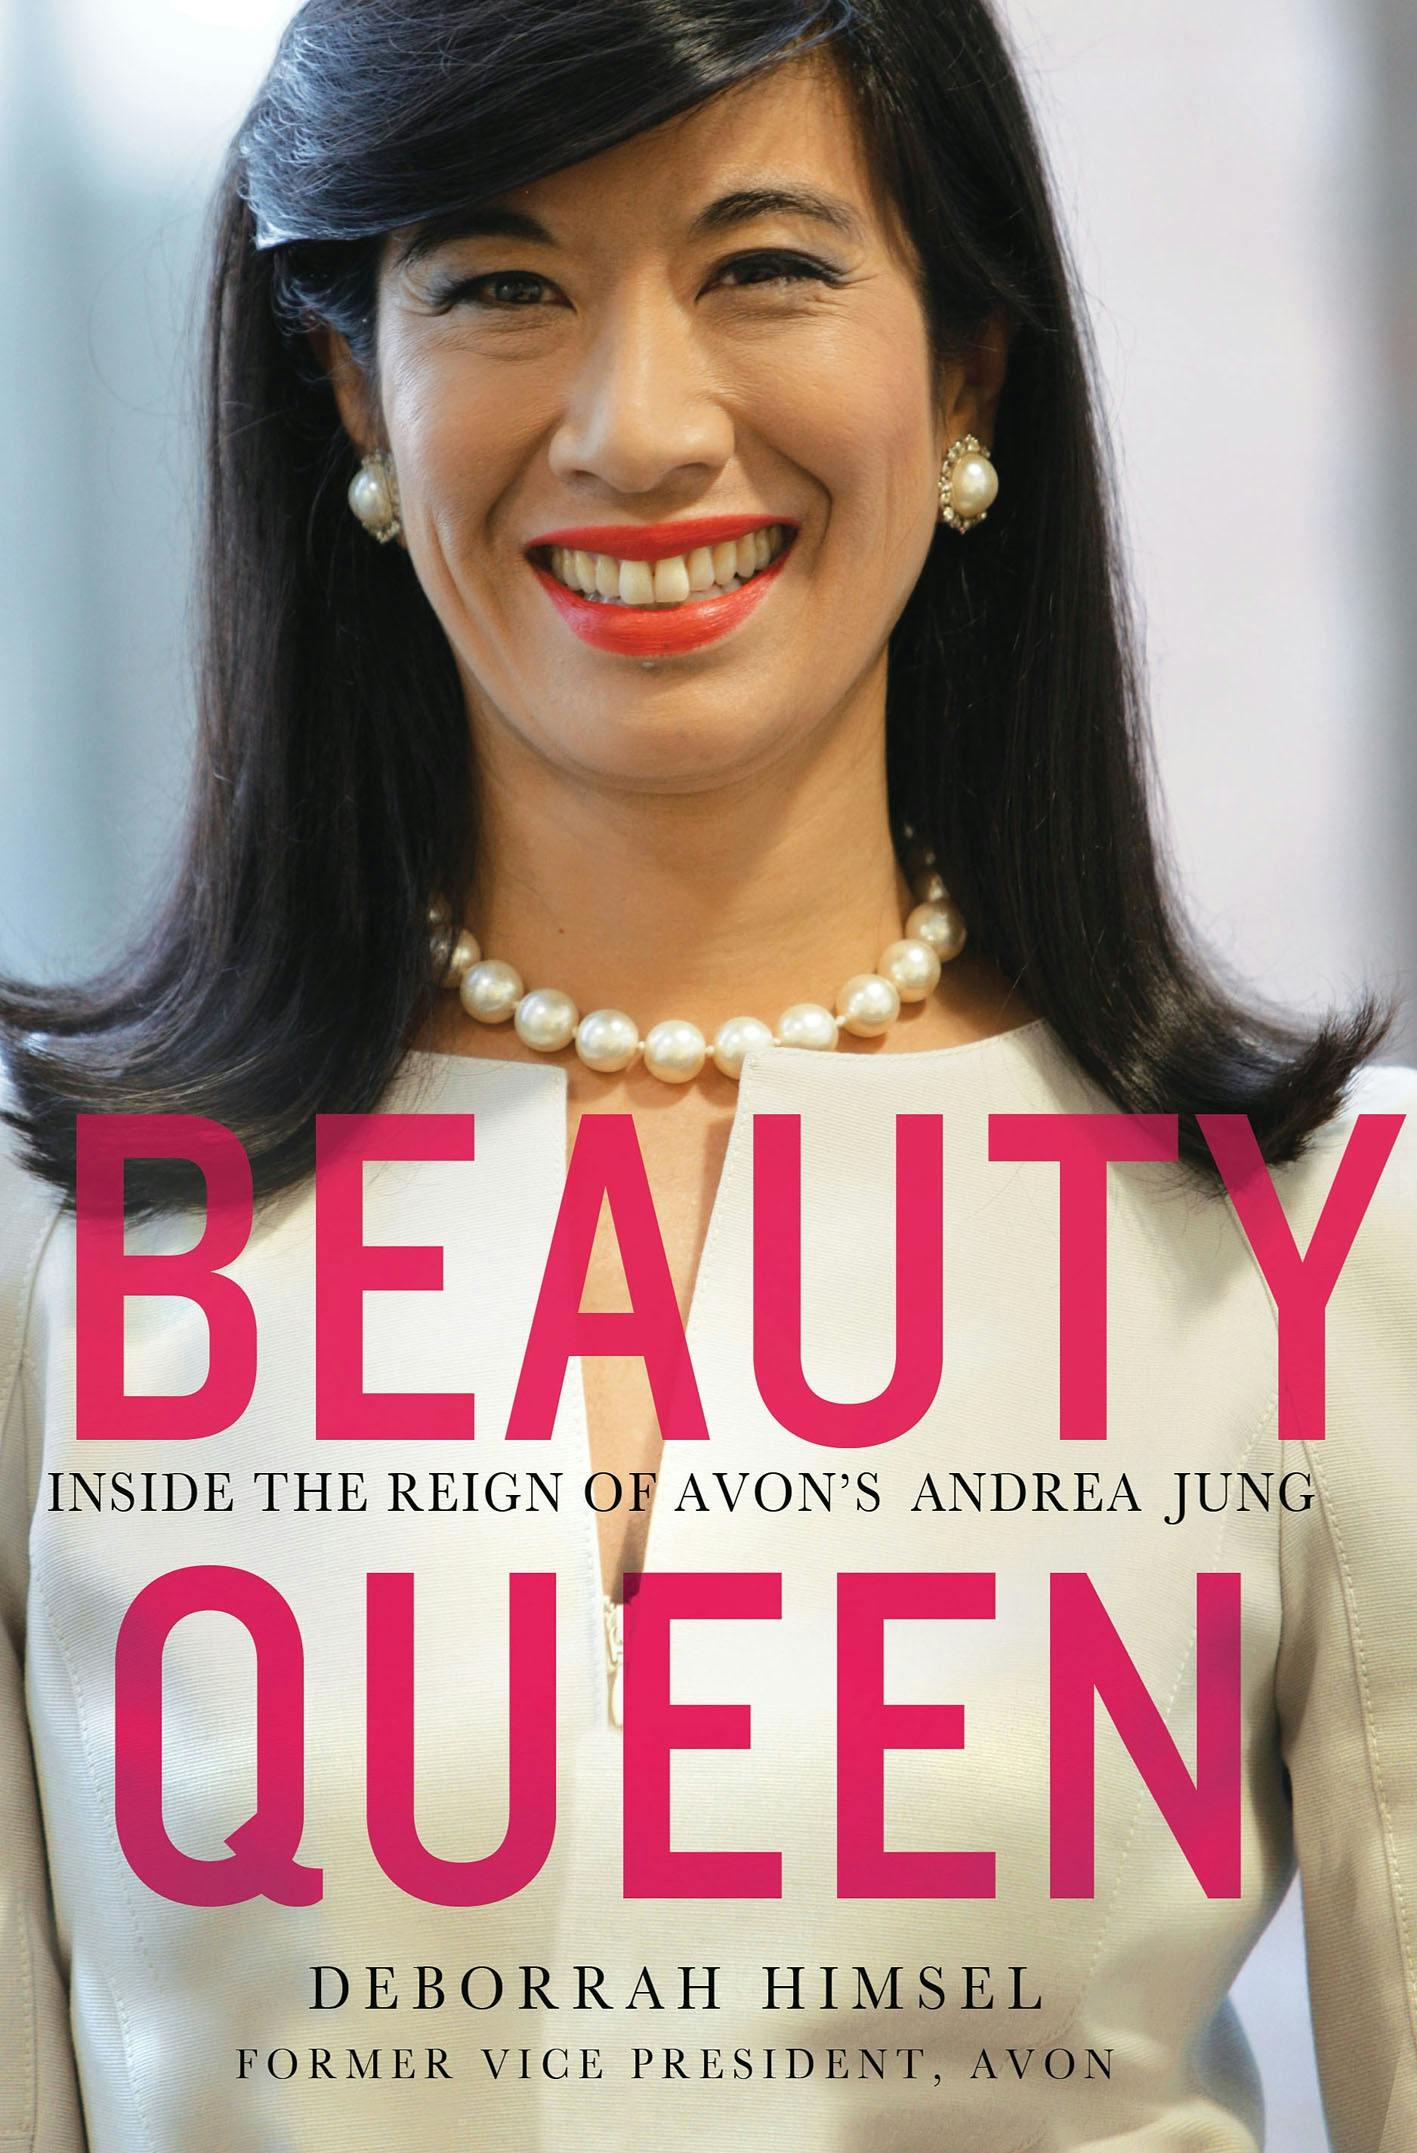 Describes for Beauty Queen by authors